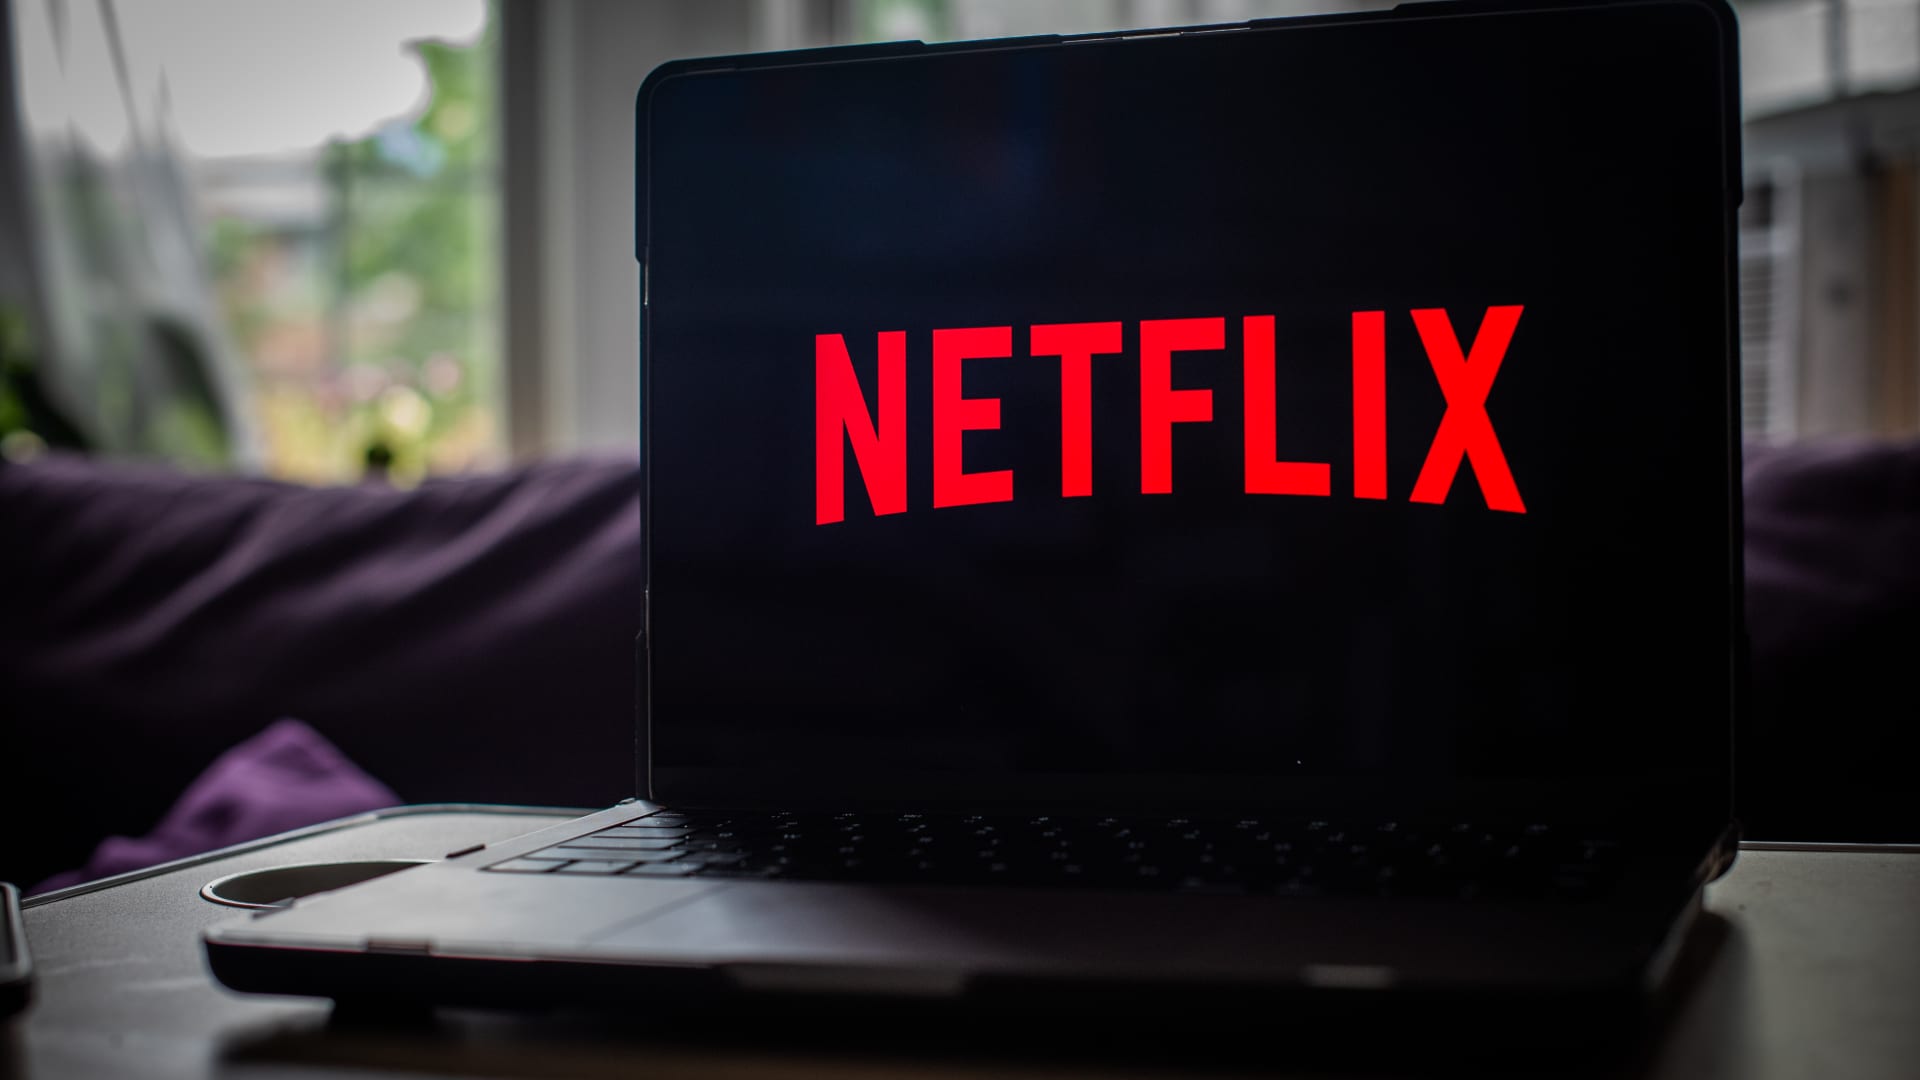 Netflix forces Wall Street to focus on profit and revenue with decision to stop reporting subscriber numbers in 2025